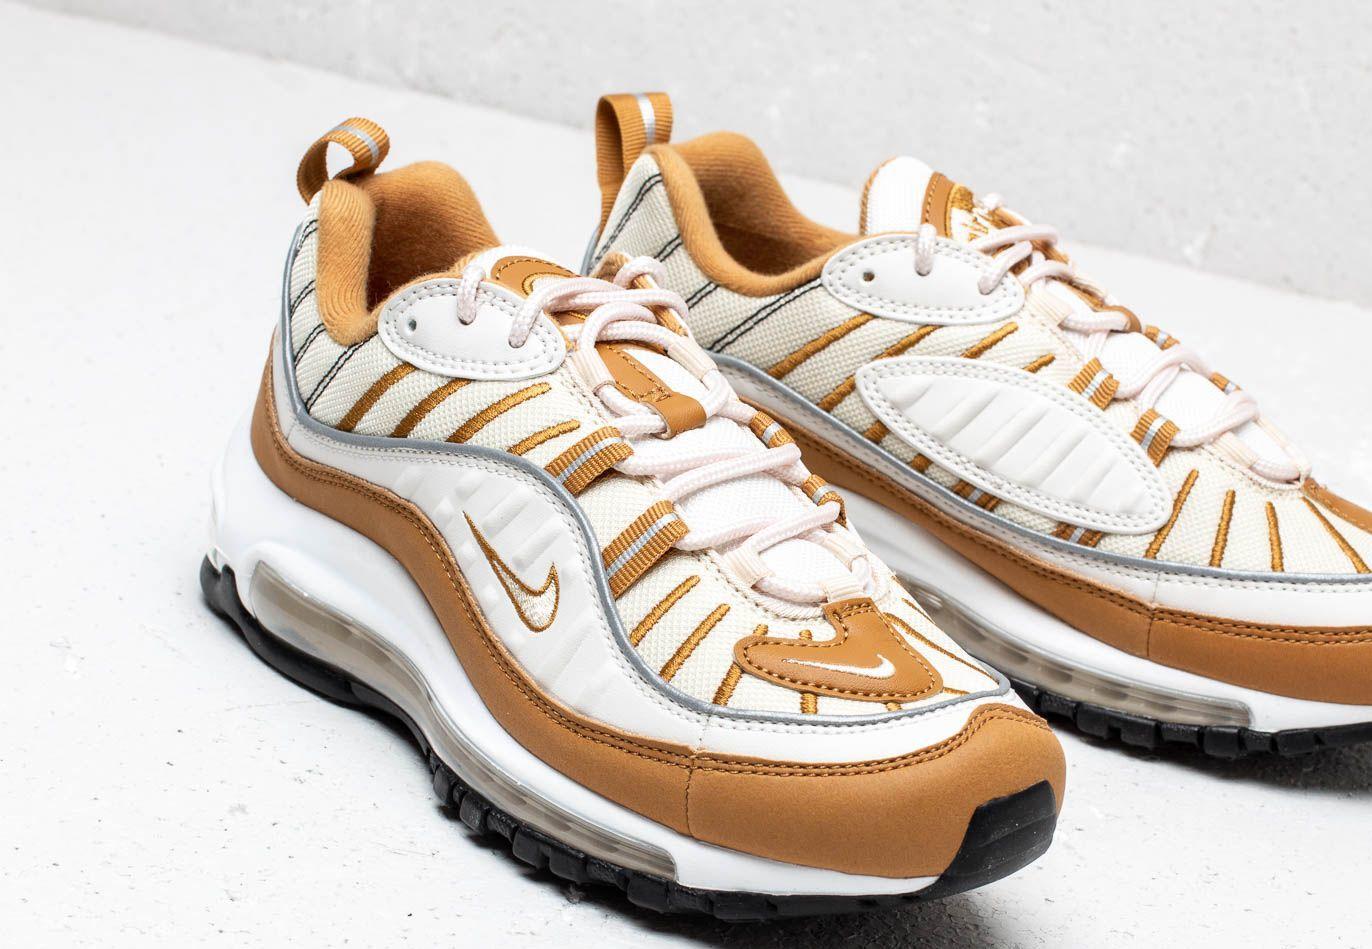 Nike Leather Wmns Air Max 98 in Brown (Natural) - Lyst